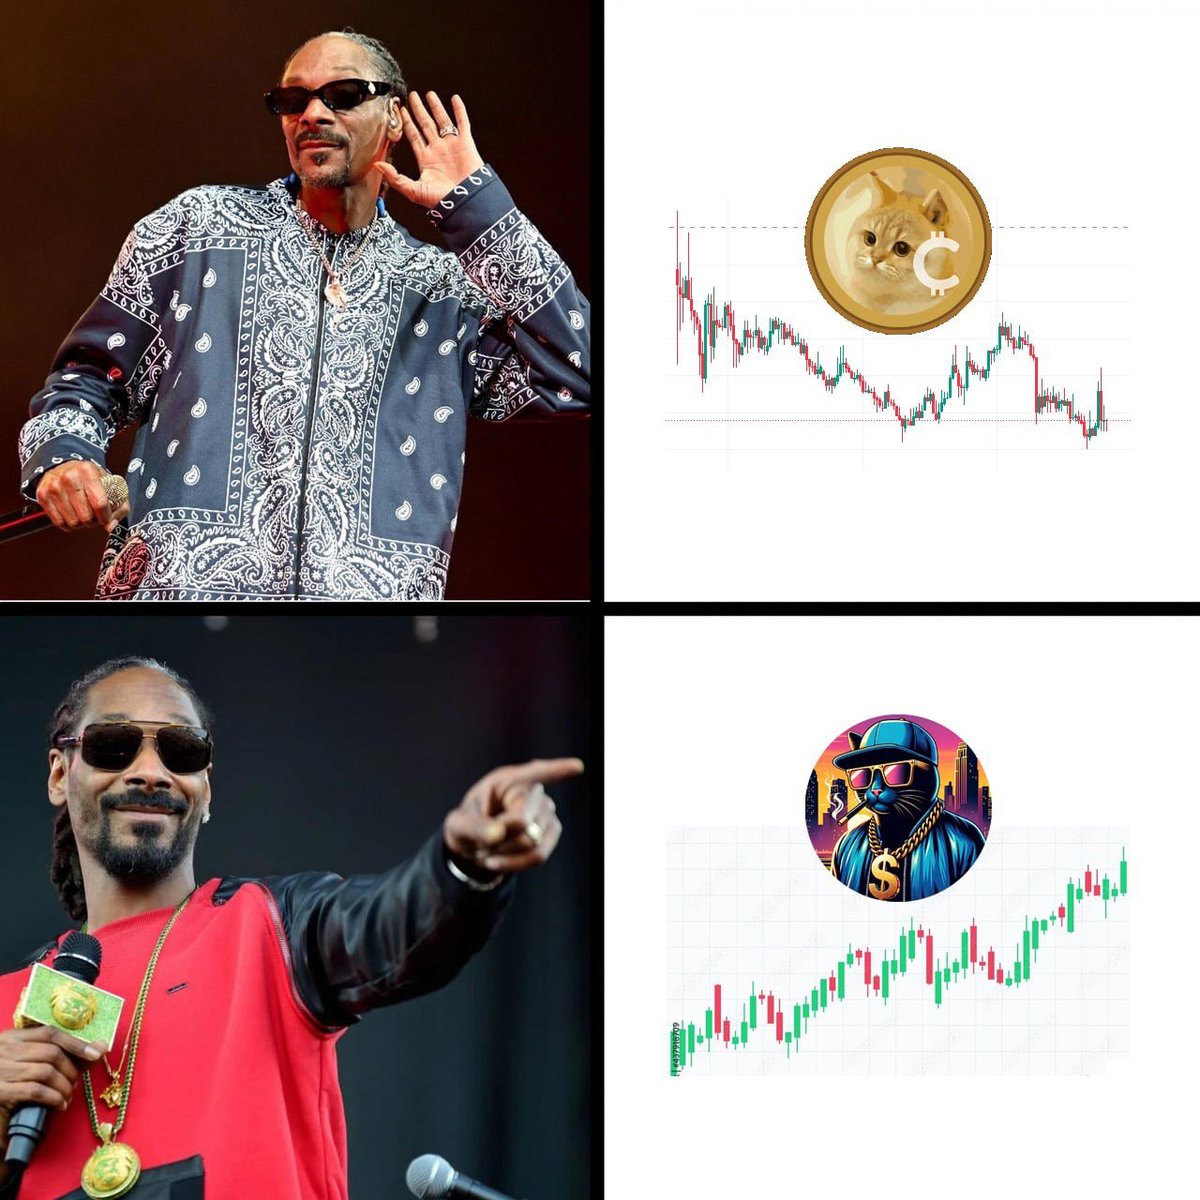 🐱Inspired by the legendary Snoop Dogg but forged in the crucible of the underworld,
🐱 Website: snoopcats.org
🐱 Twitter: twitter.com/snoopcattoken
#snoopcat #memecoin #BSC 
1SFKYI

#mt4 #technicalanalysis #nftdrop #xrp #cryptomoney